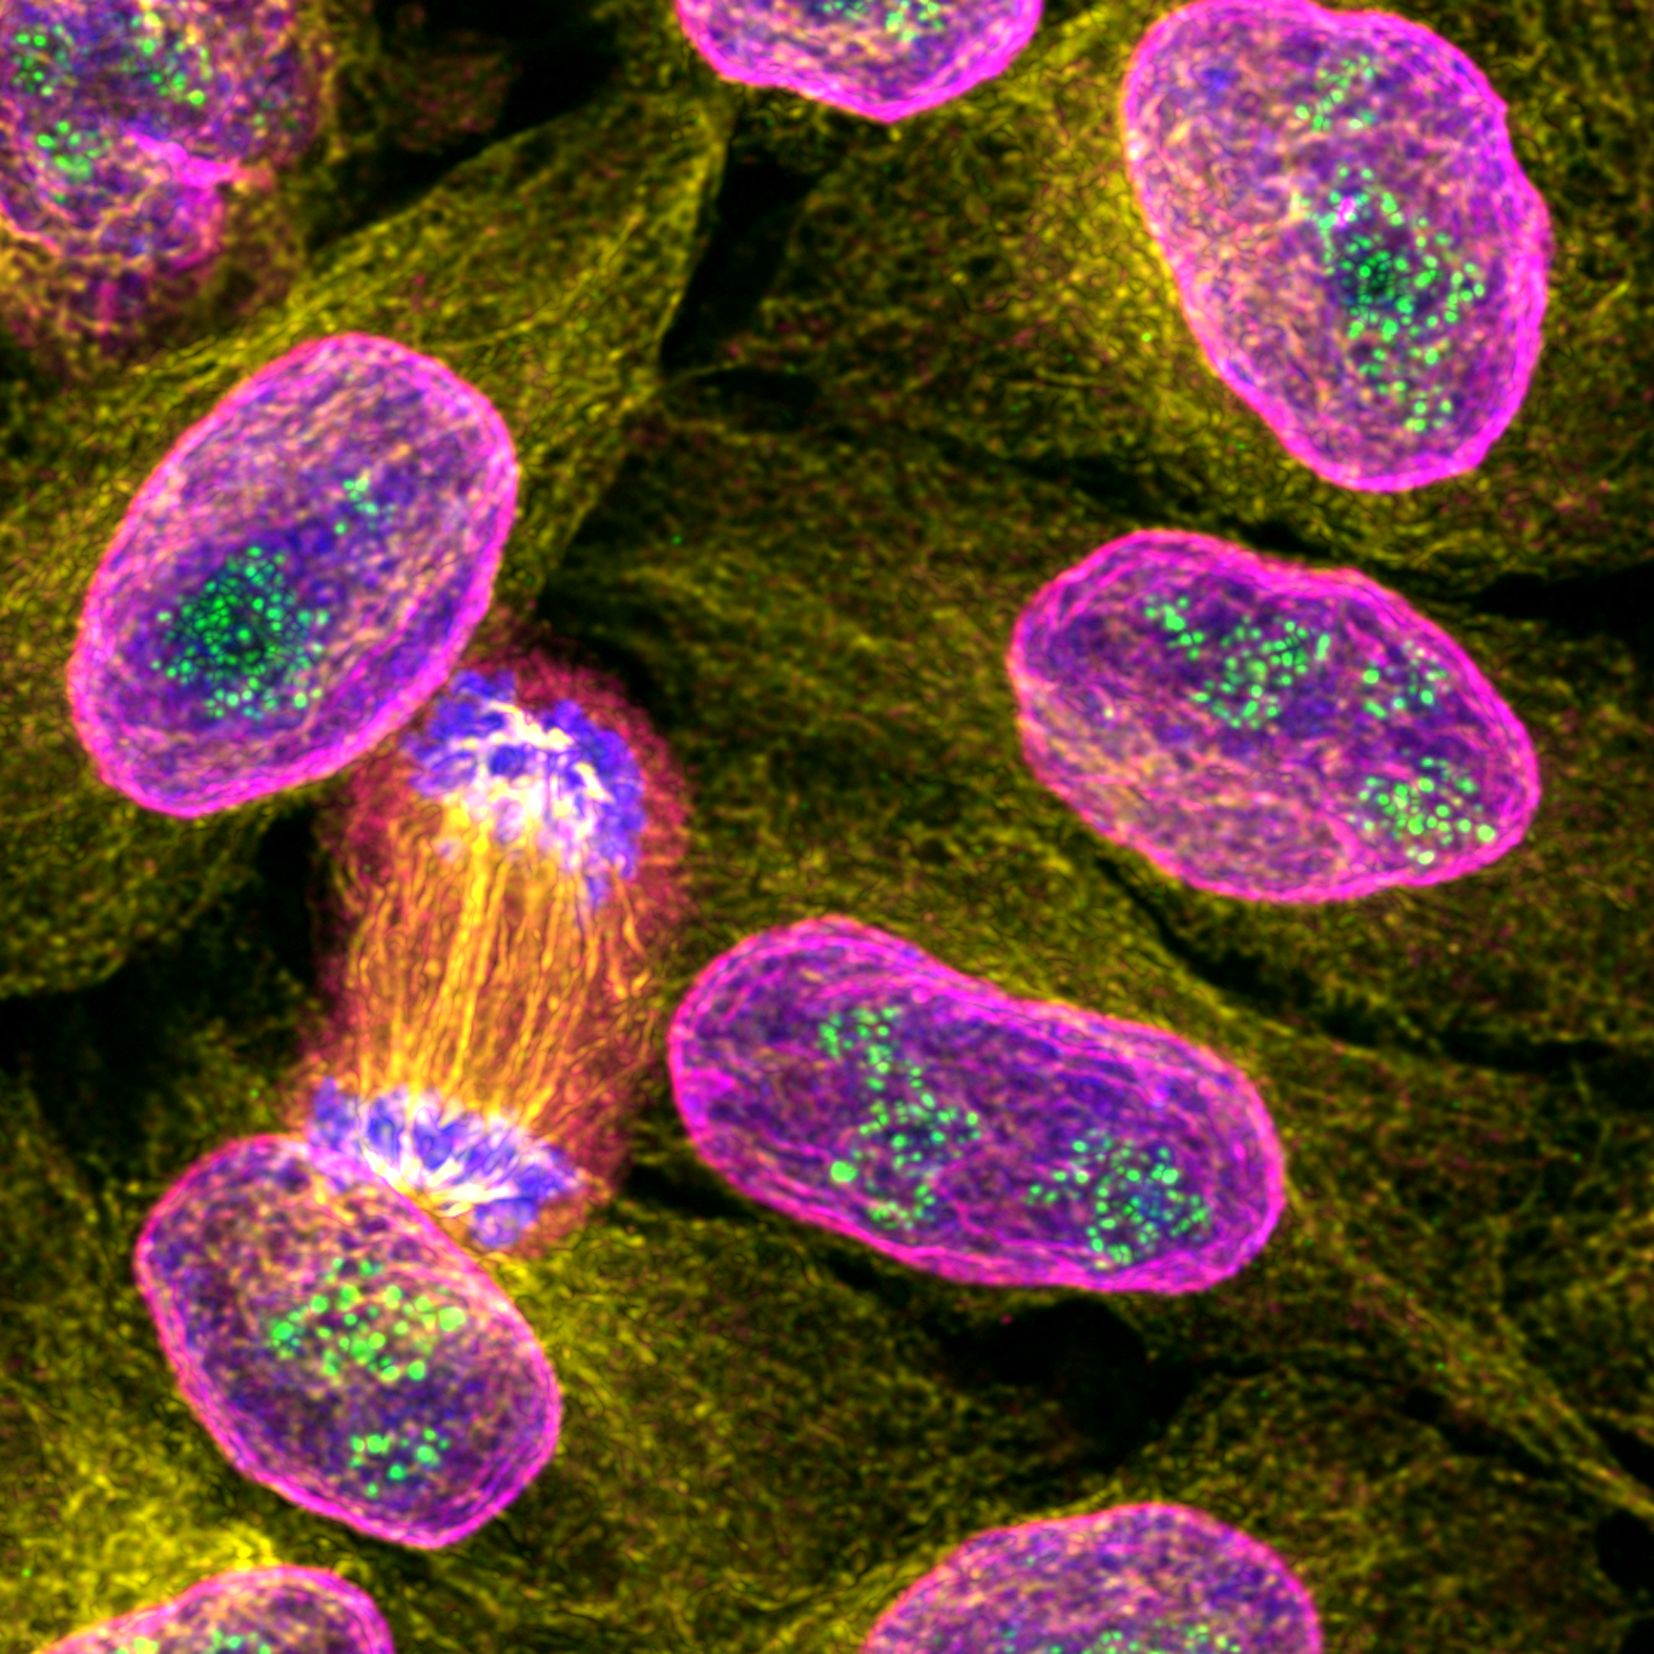 Immunofluorescence of HeLa: PFA-fixed HeLa cells were stained with anti-PAF49 labeled with FlexAble CoraLite® Plus 488 Kit (KFA041, green), anti-Tubulin (66240-1-Ig) labeled with FlexAble CoraLite® Plus 555 Kit (KFA042, yellow), anti-Lamin labeled with FlexAble CoraLite® Plus 647 Kit (KFA043, magenta) and DAPI (blue). 
Confocal images were acquired with a 100x oil objective and post-processed. Images were recorded at the Core Facility Bioimaging at the Biomedical Center, LMU Munich.